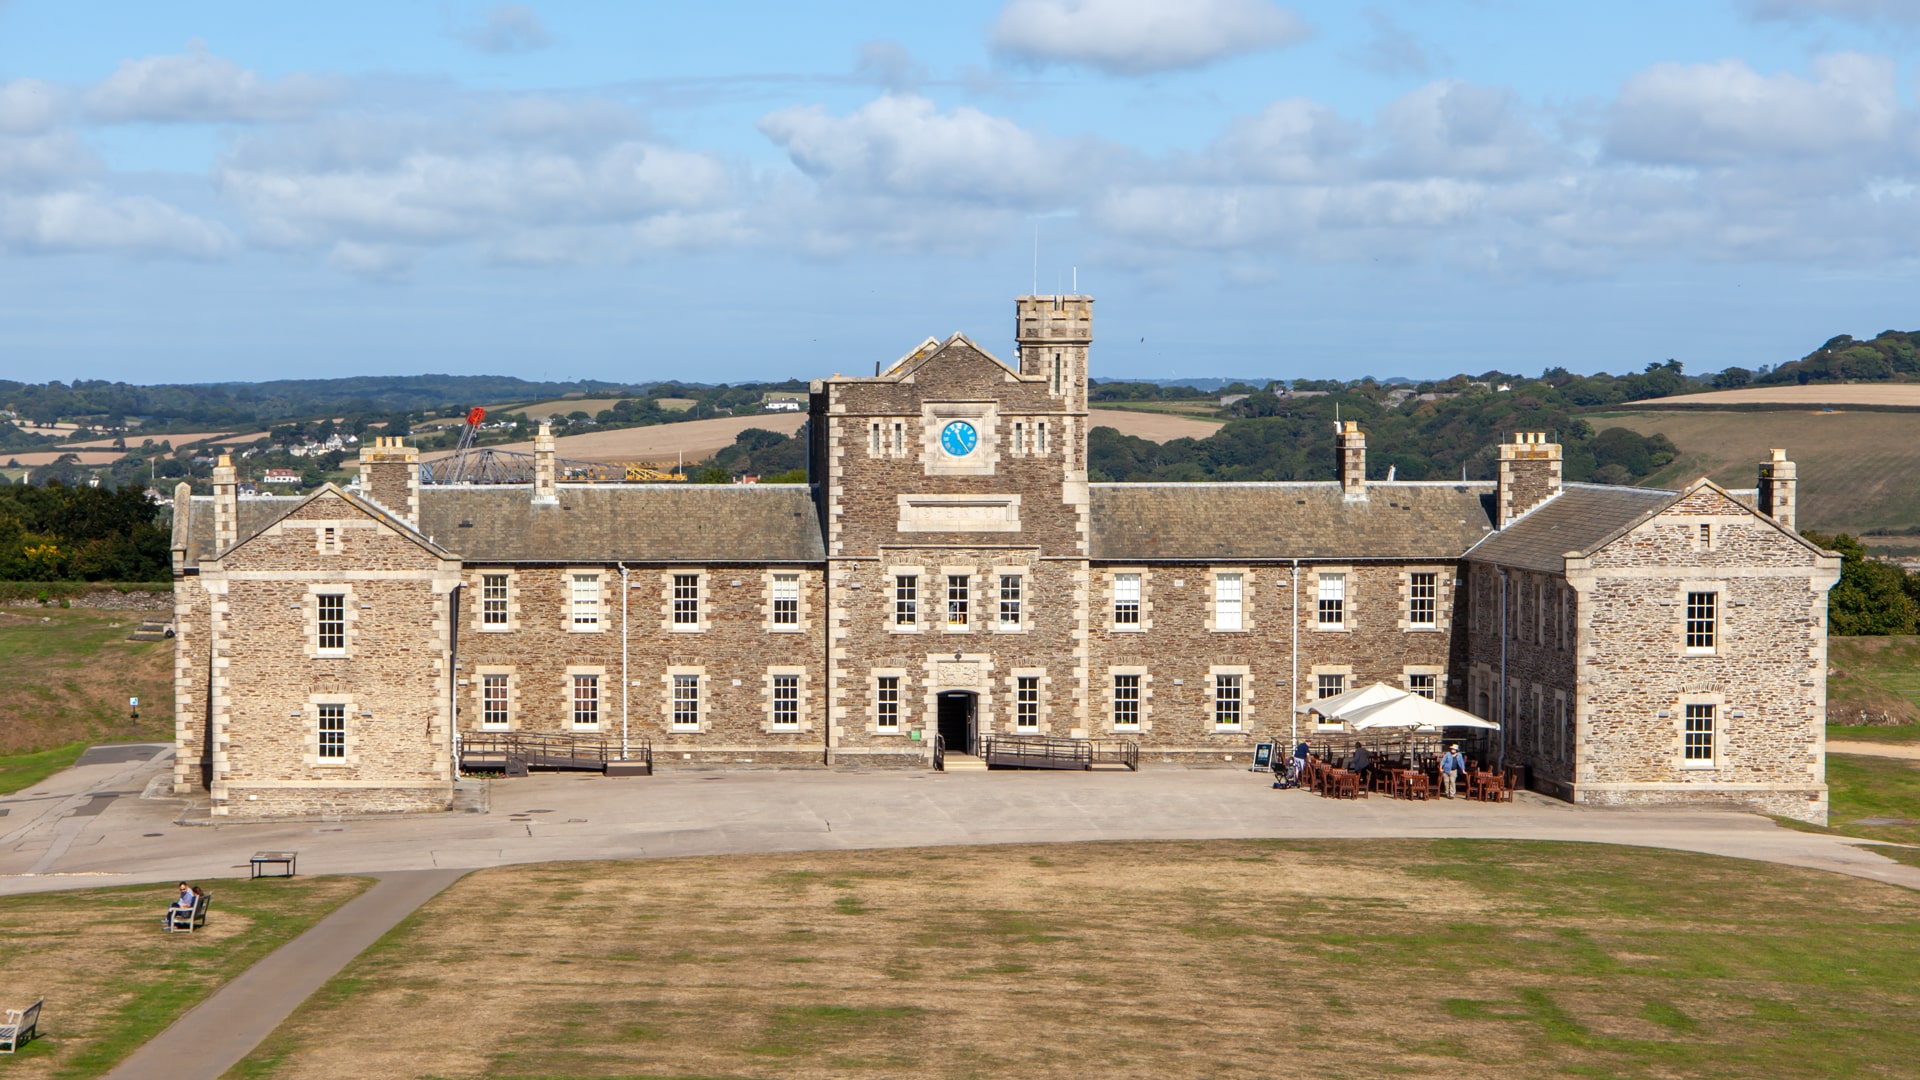 Pendennis in Cornwall